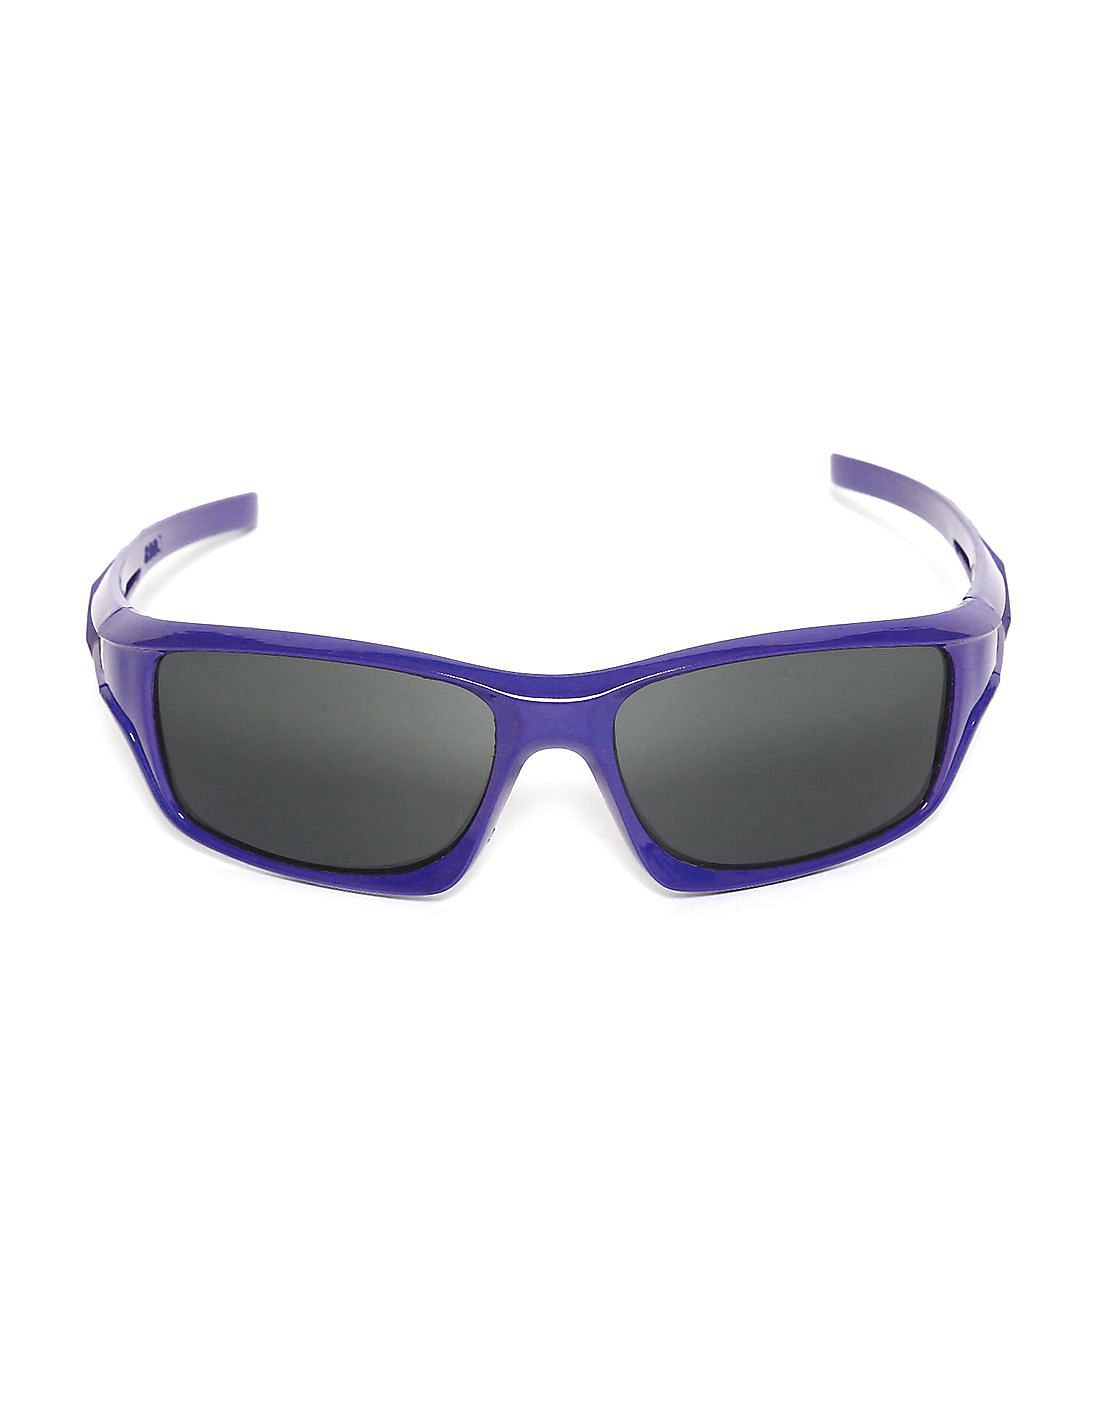 70% Off on Sunglasses Starts from Rs. 60